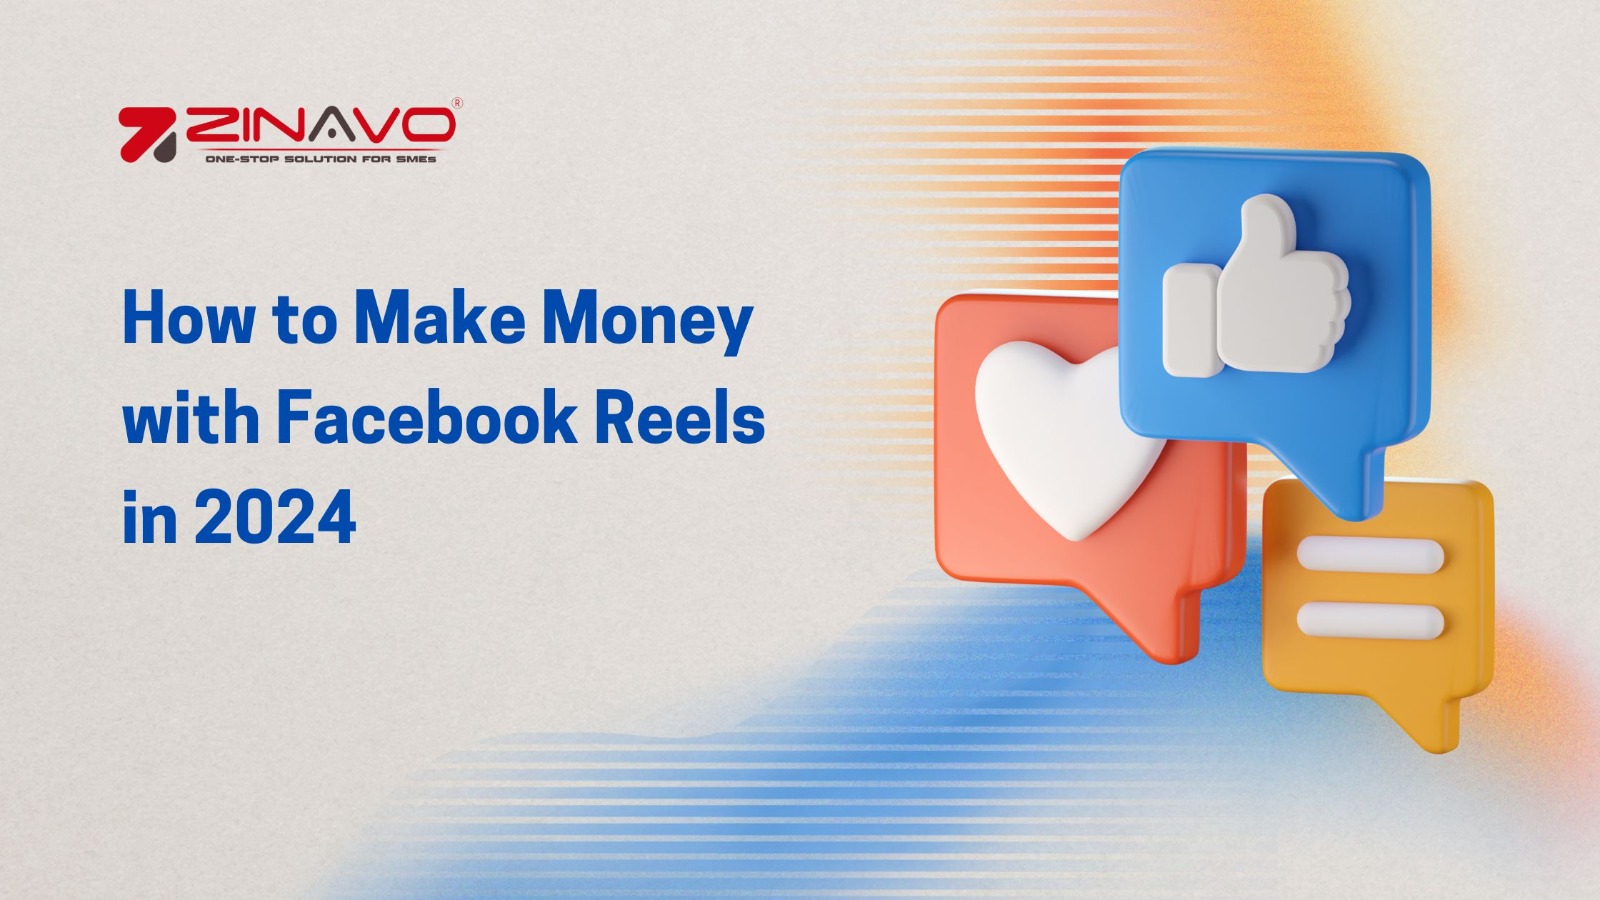 How to Make Money with Facebook Reels in 2024